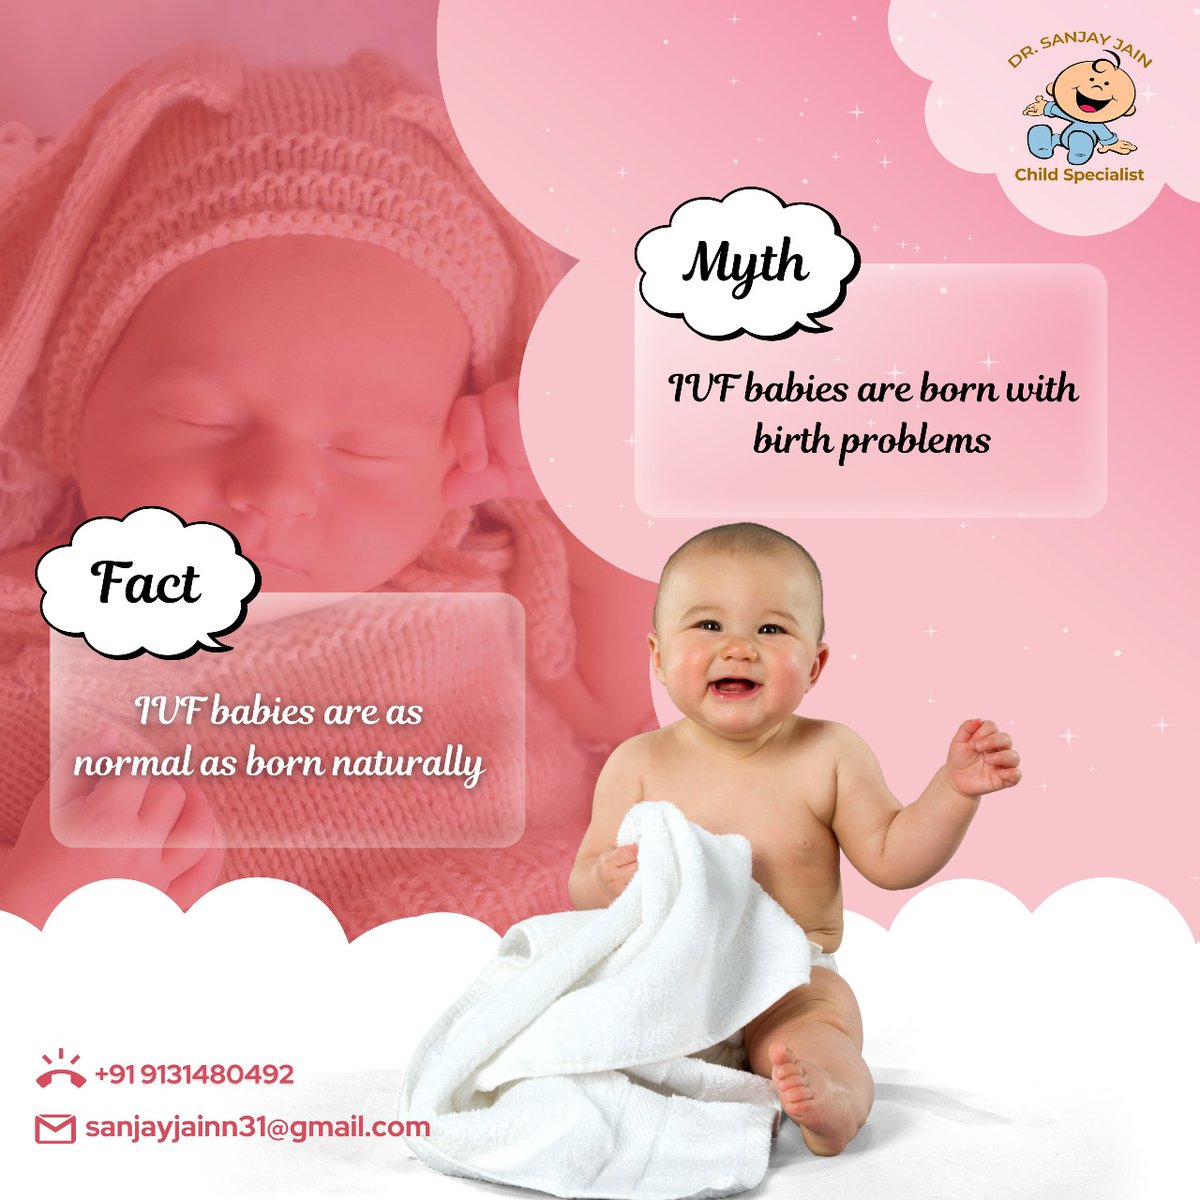 #Myth : IVF Babies Are Born With Birth Problems.
#Fact : IVF Babies Are As Normal As Born Naturally.

#drsanjayjain #indorecity #ChildSpecialist #IVFBabies #Indore #Bestchildspecialist #myth #facts #BirthProblems #BornNaturally #childspecialistindore #bookappointment